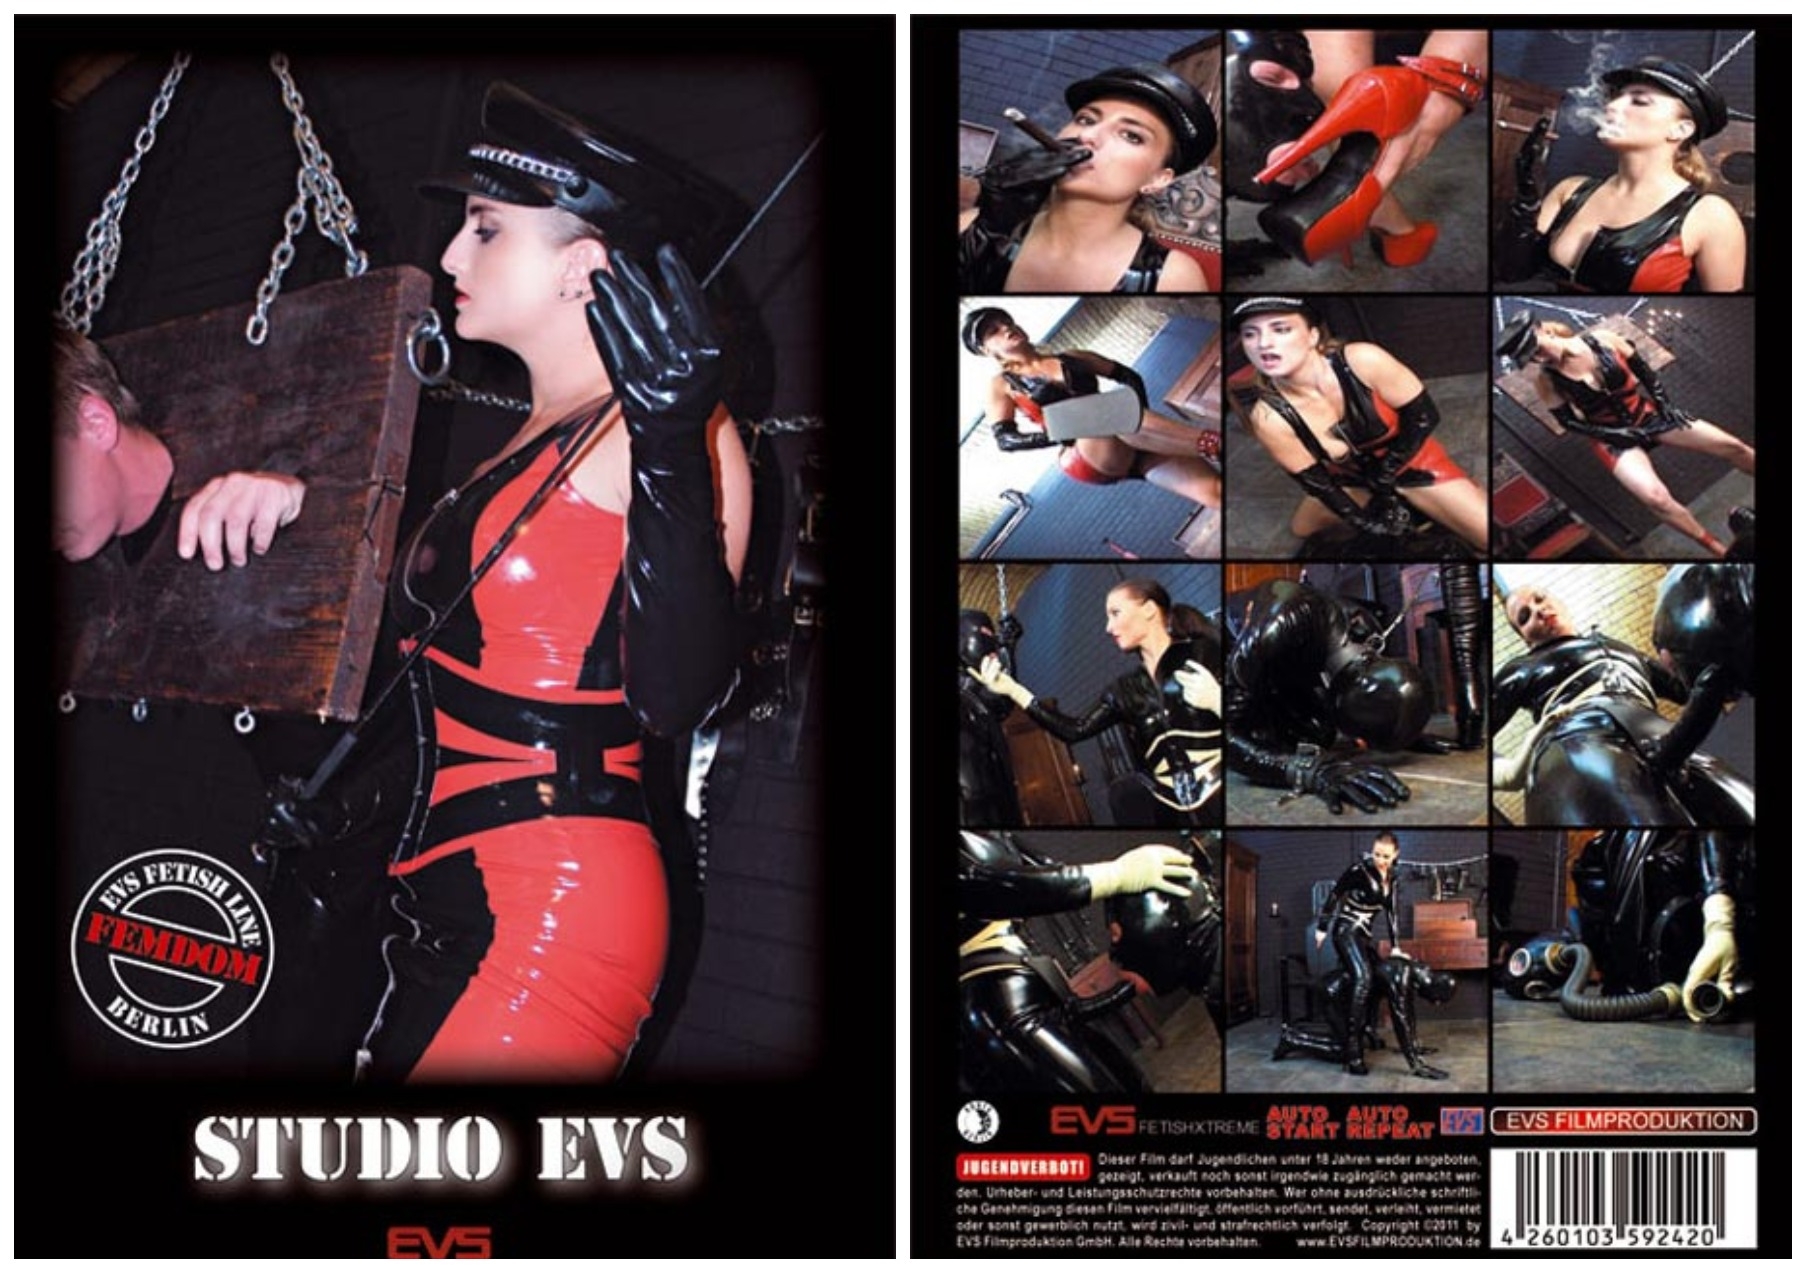 Miss Kathy - Studio EVS [2011, Studio EVS, Gas mask, Rubber and Leather, Smoking, DVDRip]